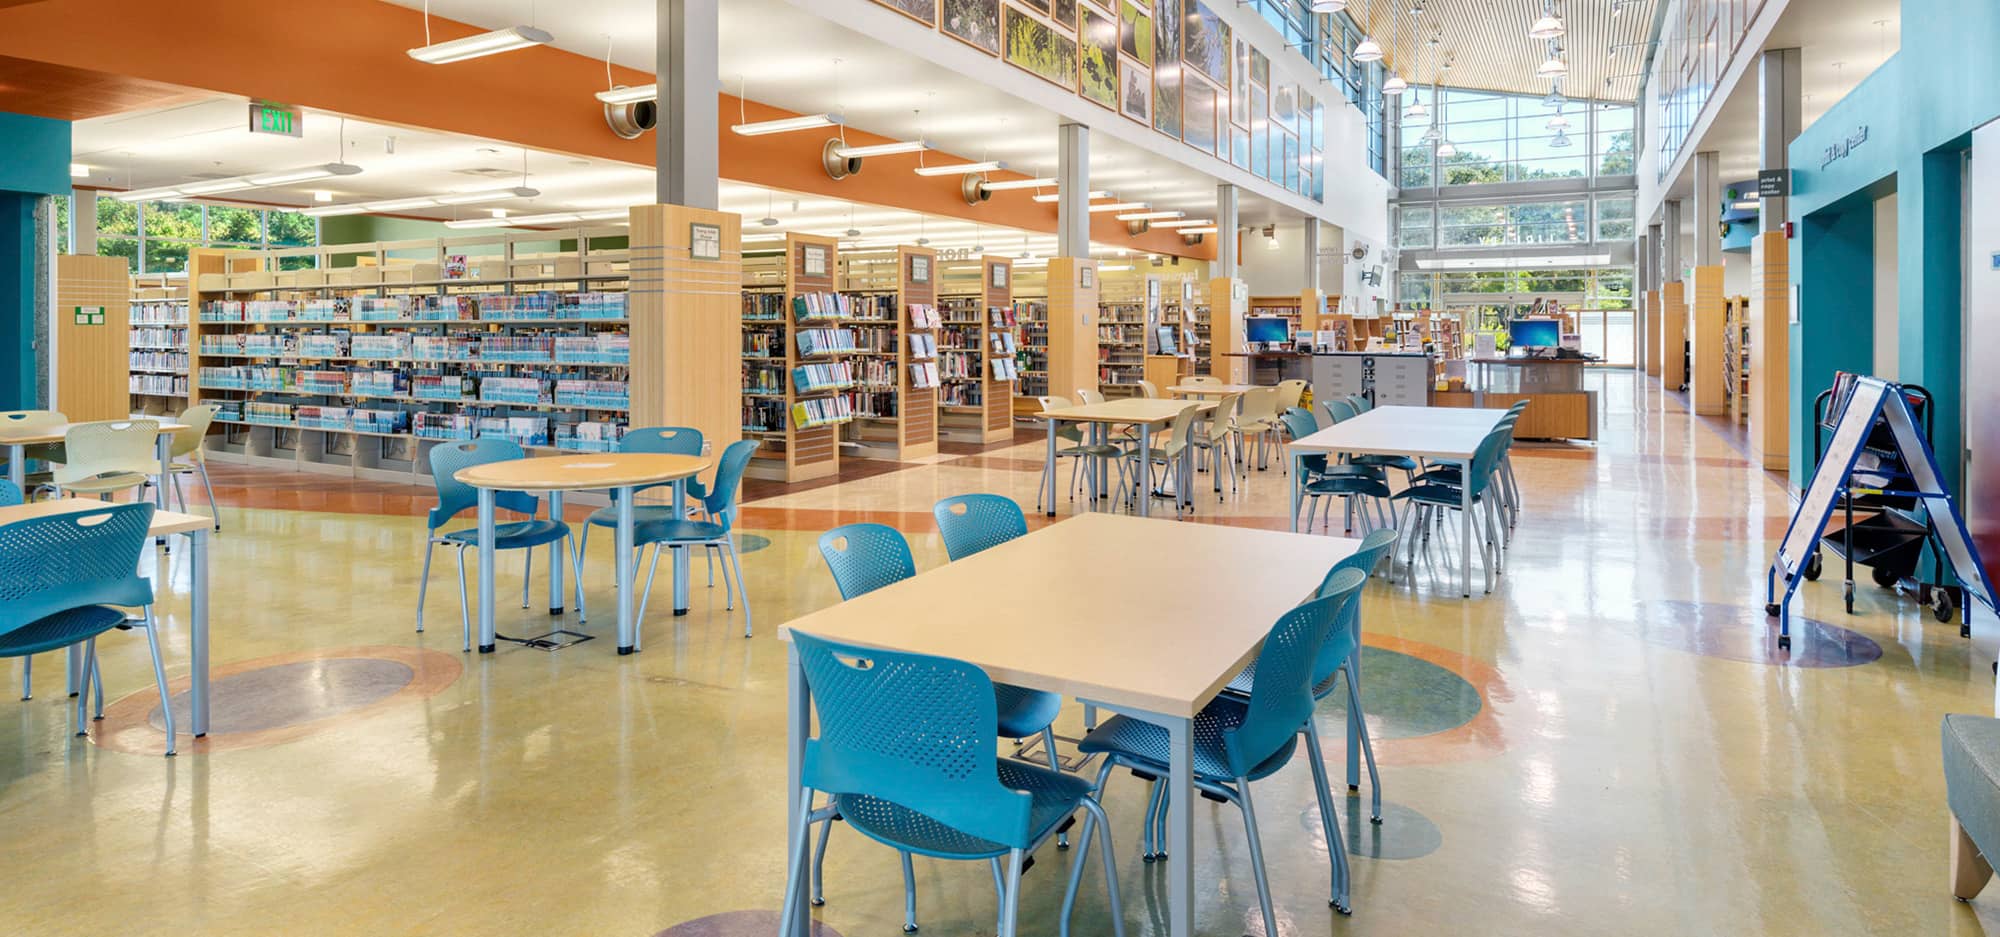 Library Interior including tables and bookshelves.